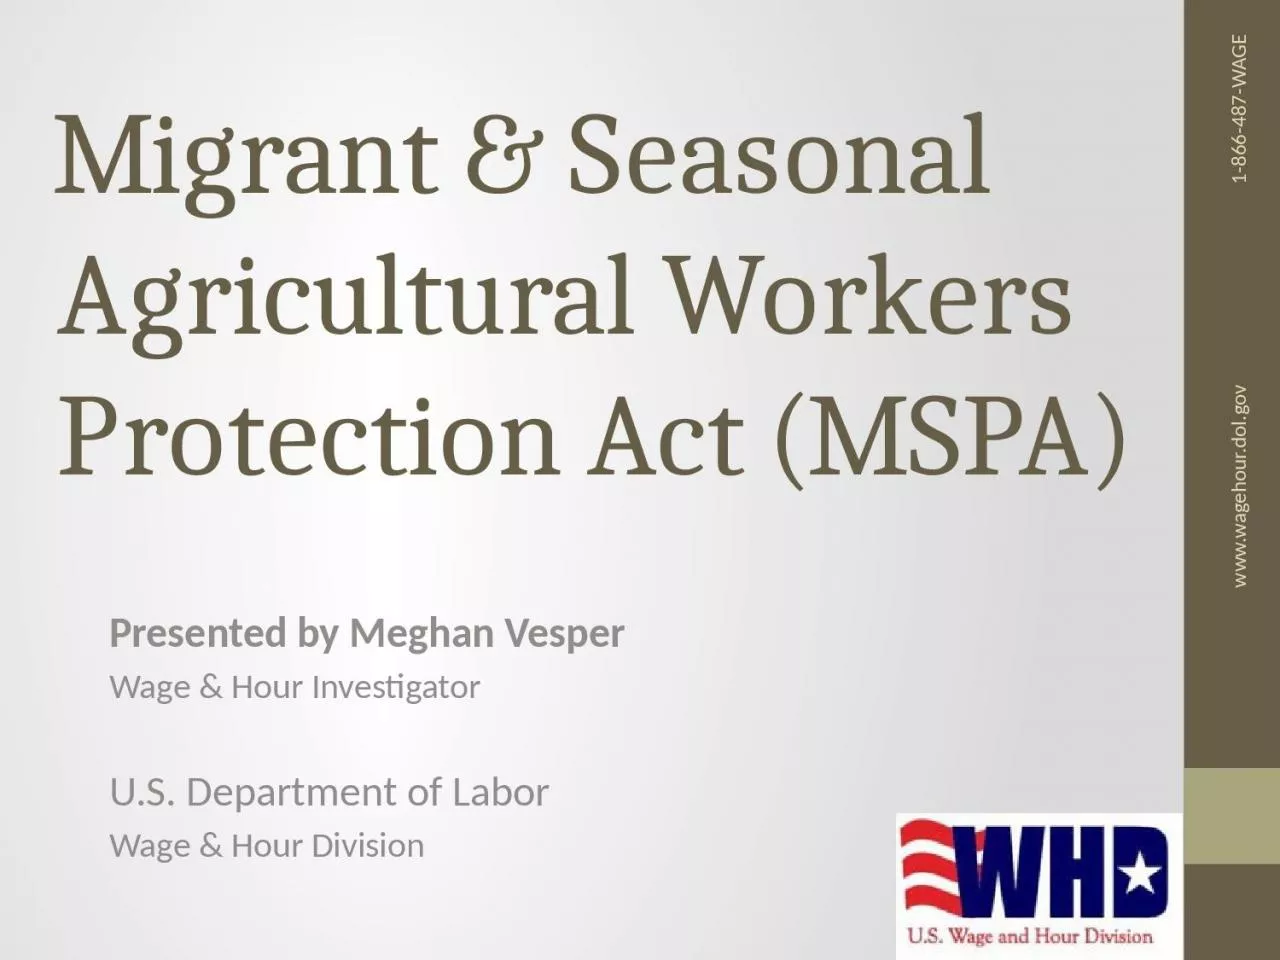 Migrant & Seasonal Agricultural Workers Protection Act (MSPA)